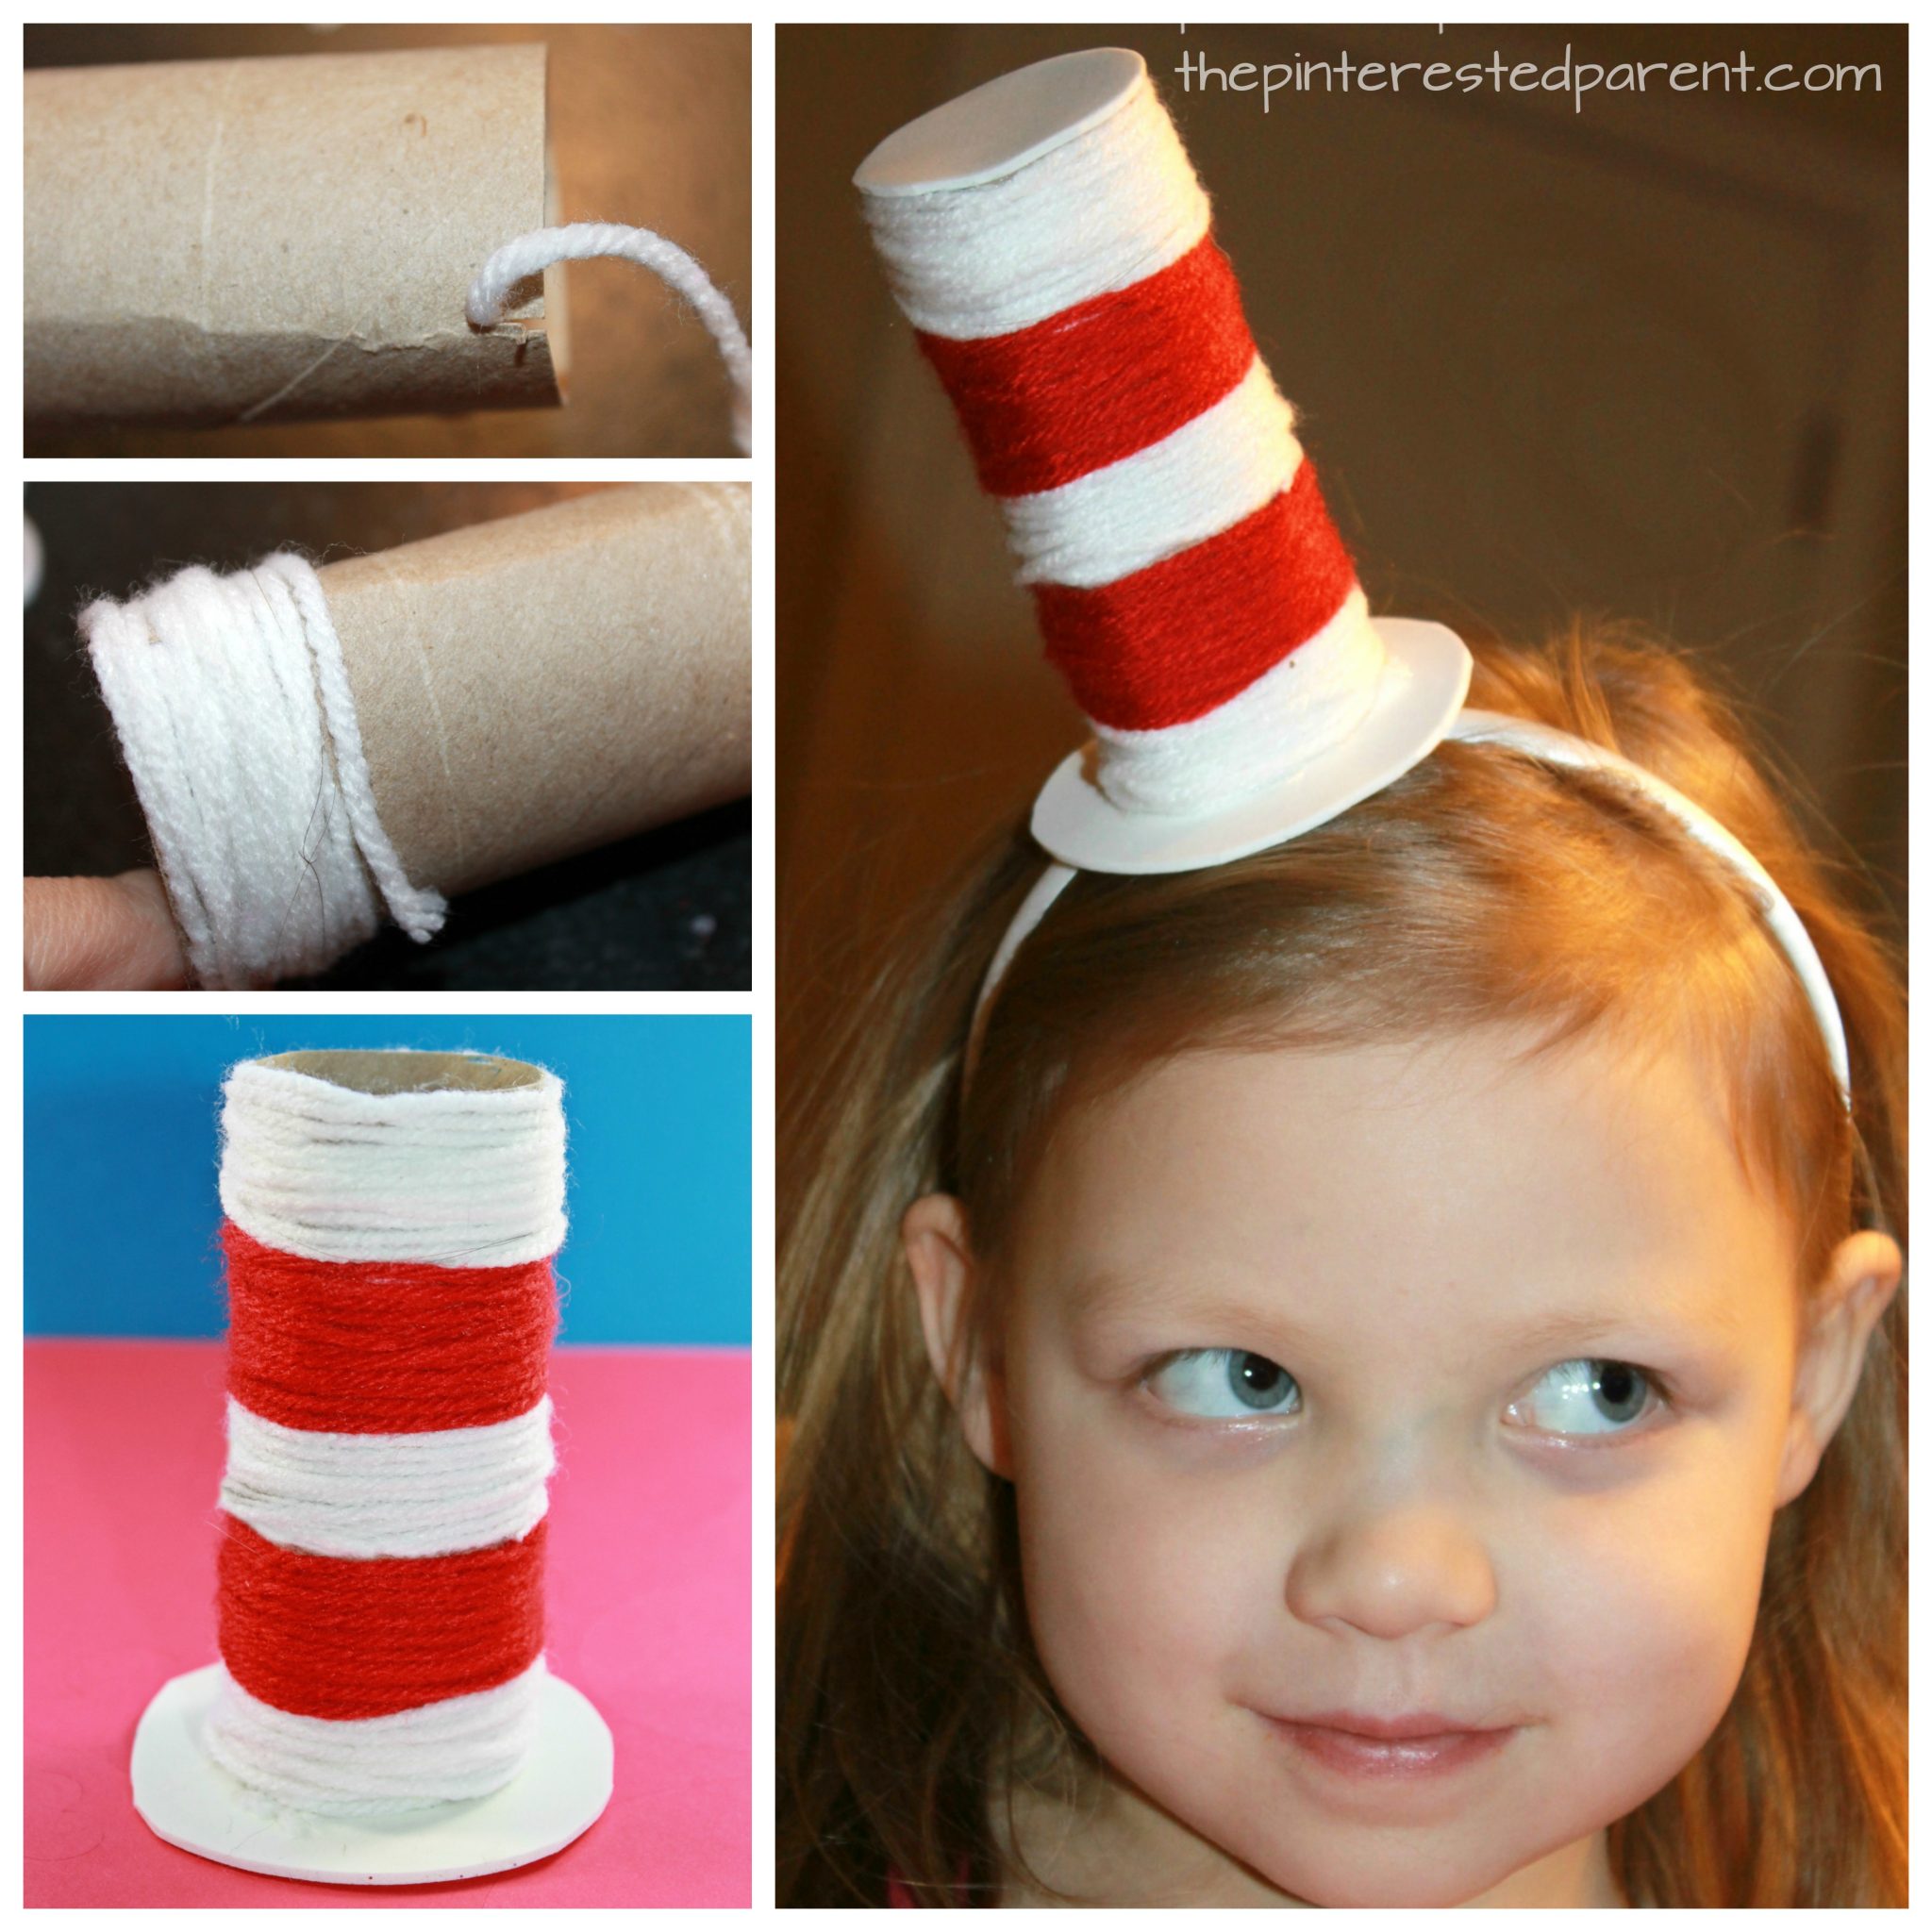 Toilet paper tube Dr. Seuss headband hat. Recycle cardboard rolls wrap with yarn for an easy Cat in the Hat inspired arts and craft project for the kids. A great fine motor activity as well.